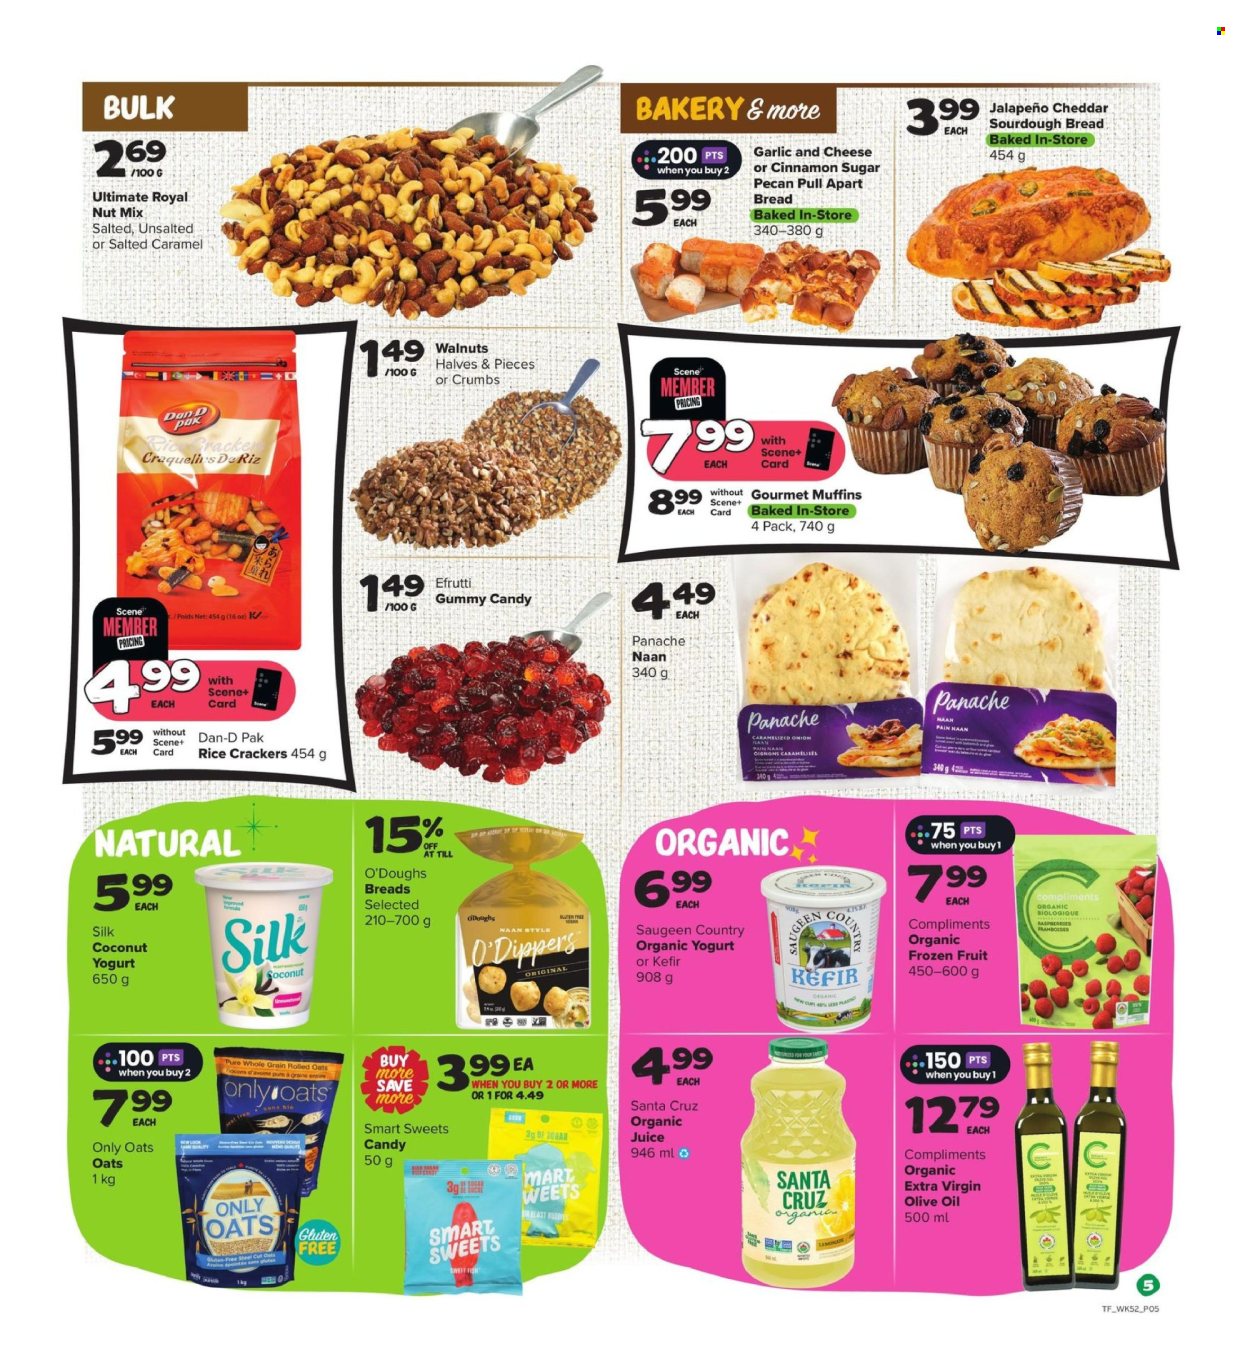 Thrifty Foods flyer  - April 25, 2024 - May 01, 2024.